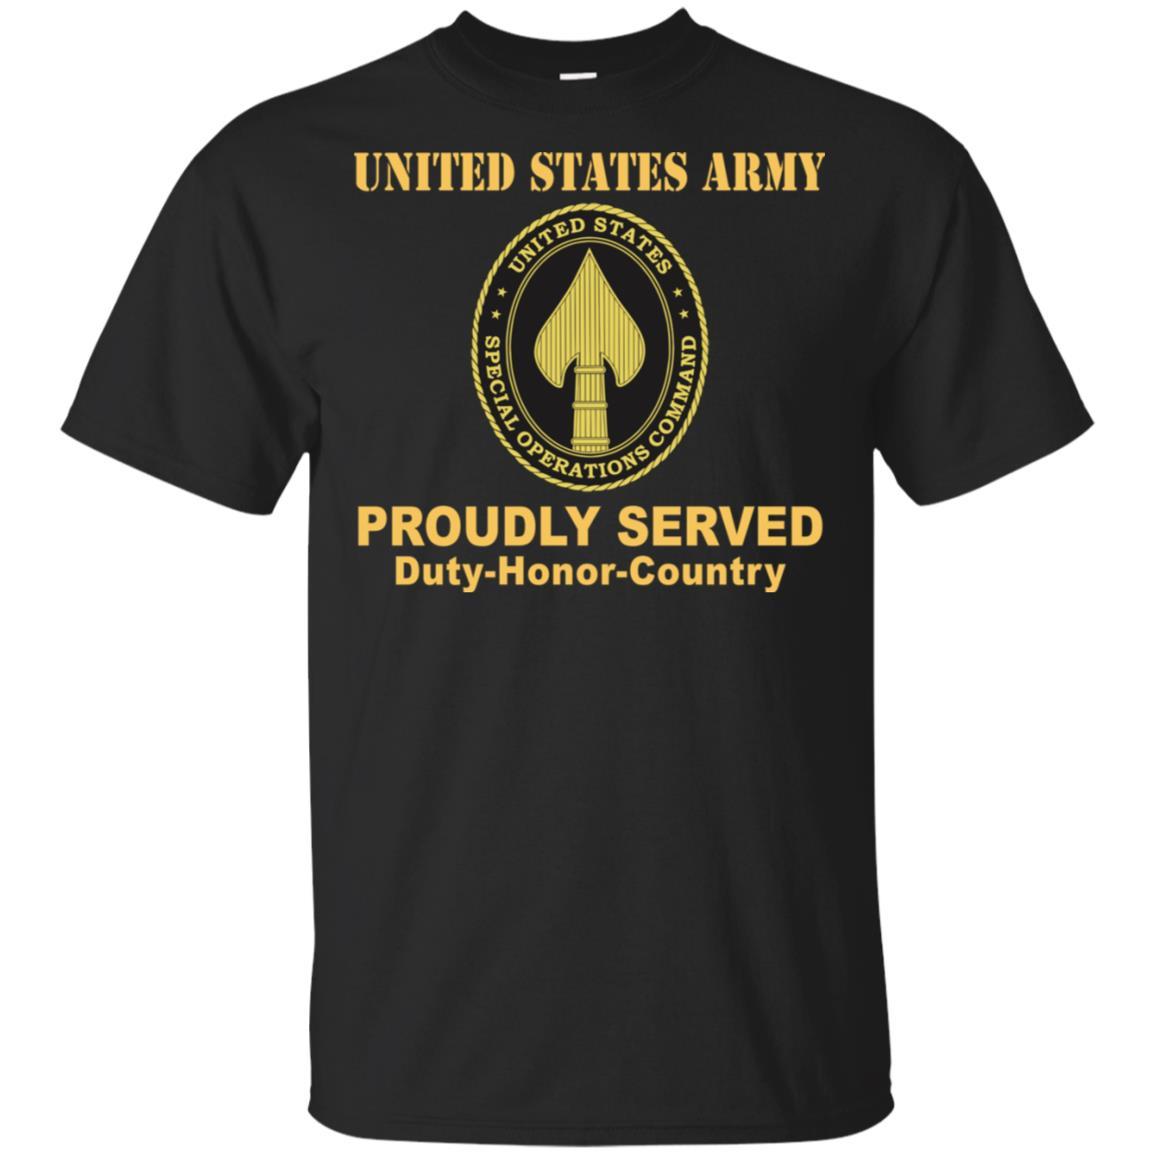 US ARMY USA ELEMENT SPECIAL OPERATIONS COMMAND- Proudly Served T-Shirt On Front For Men-TShirt-Army-Veterans Nation